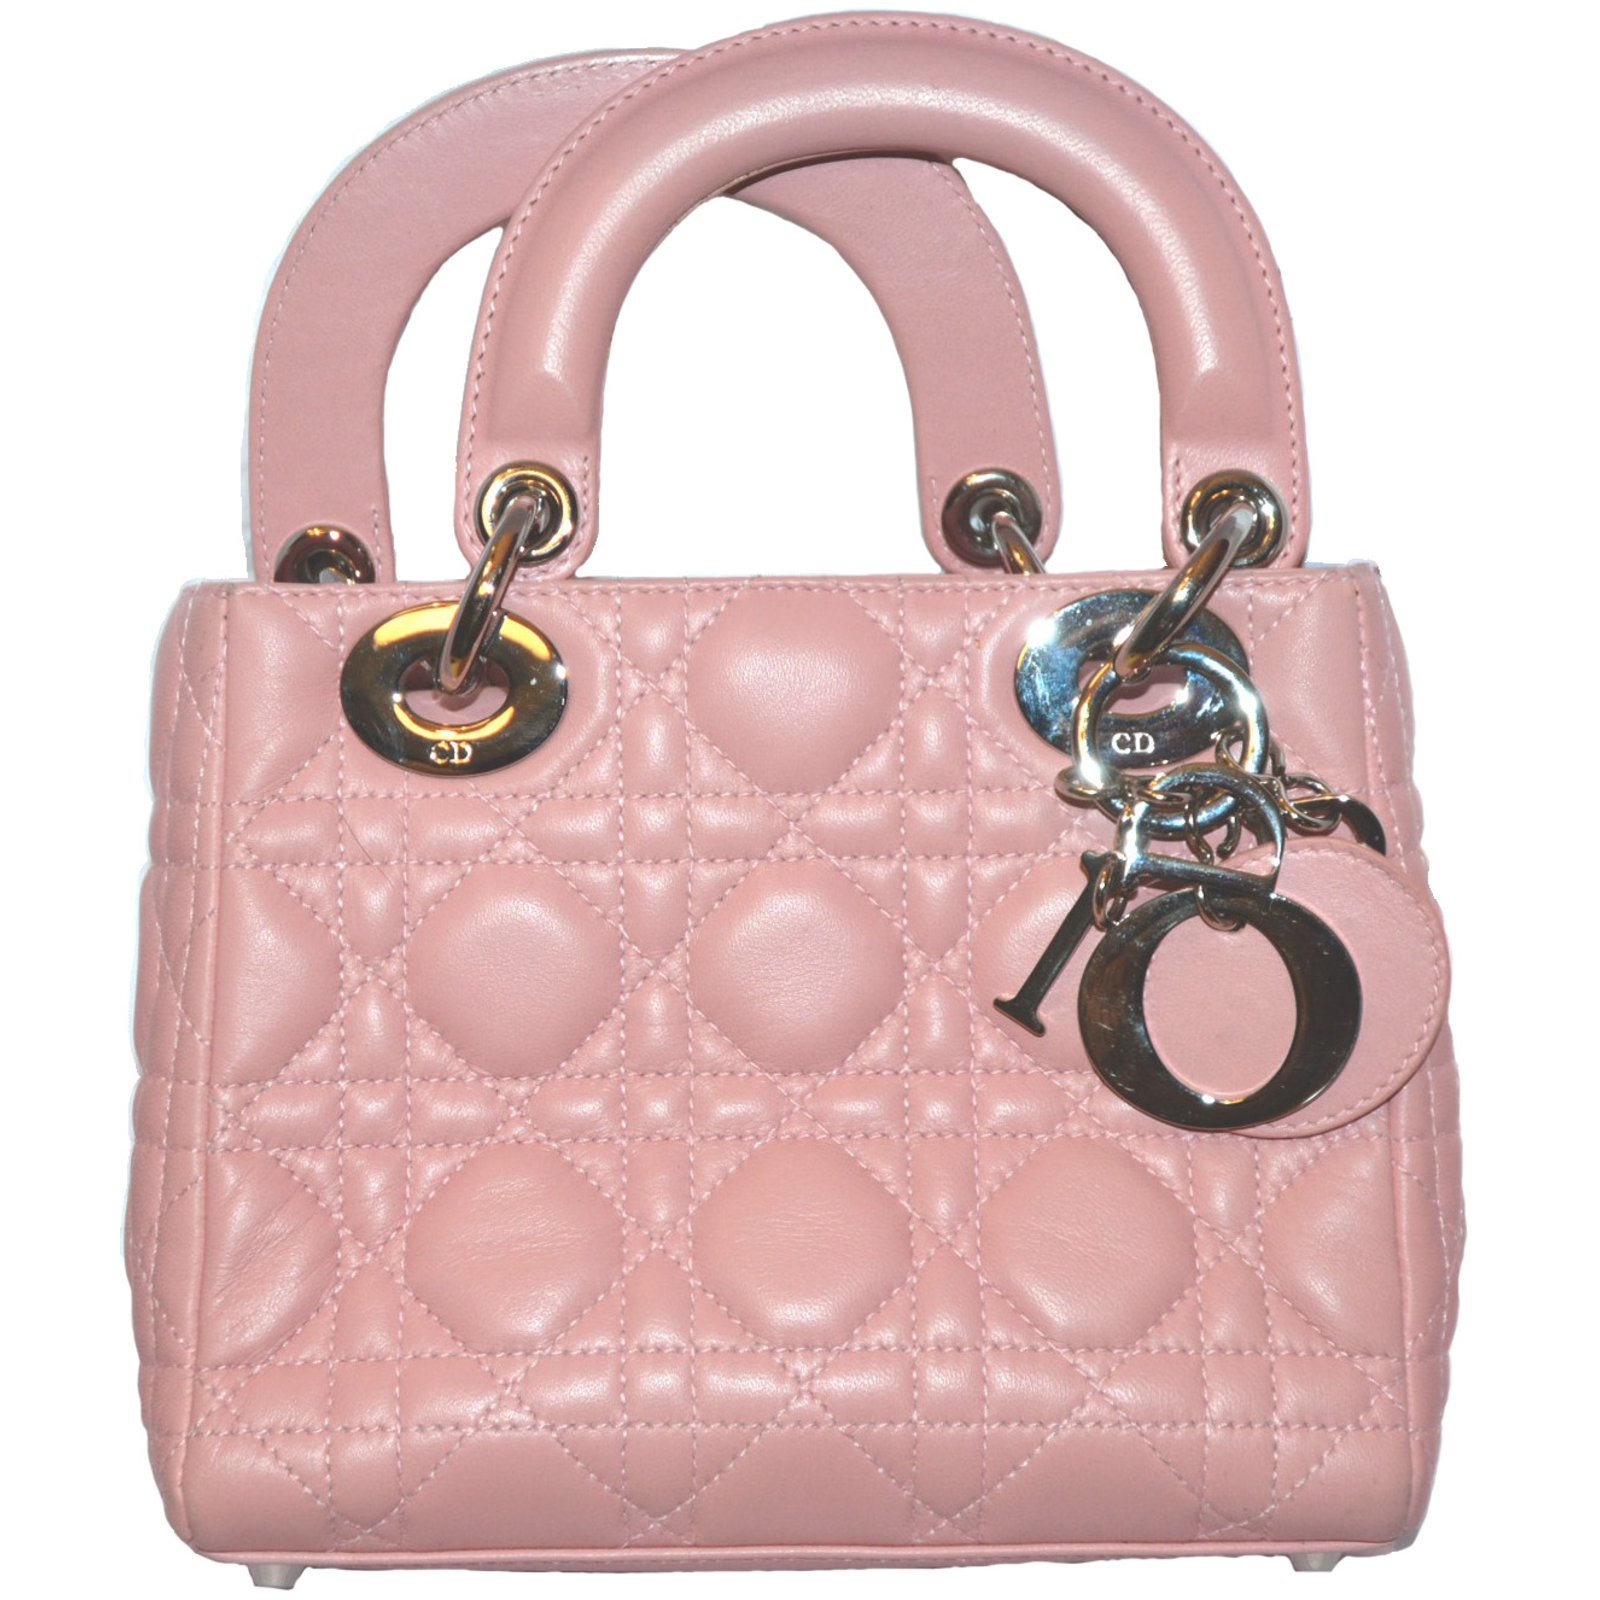 lady dior small pink